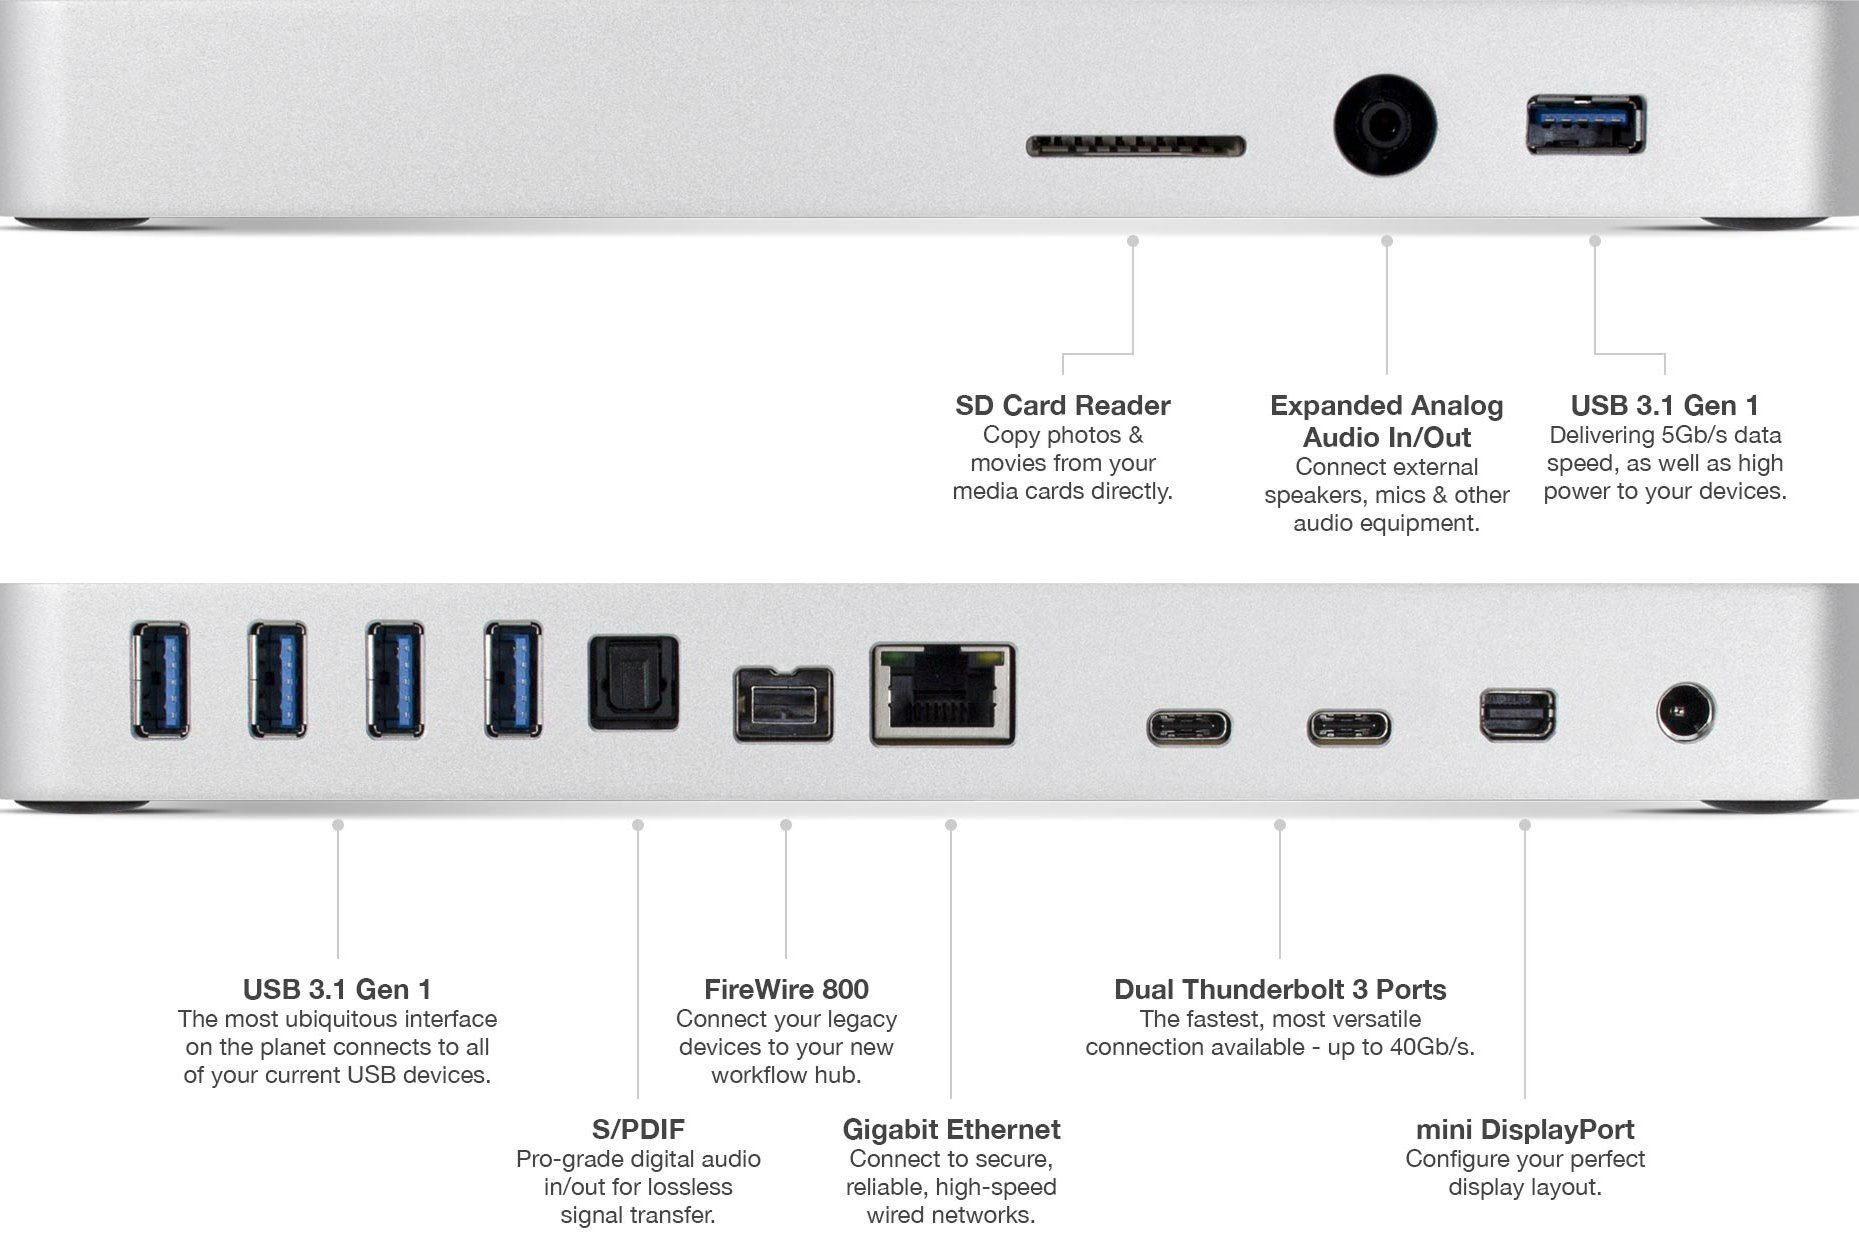 OWC Thunderbolt 2 Dock HD, Recommend For MacBook Air & MacBook Pro